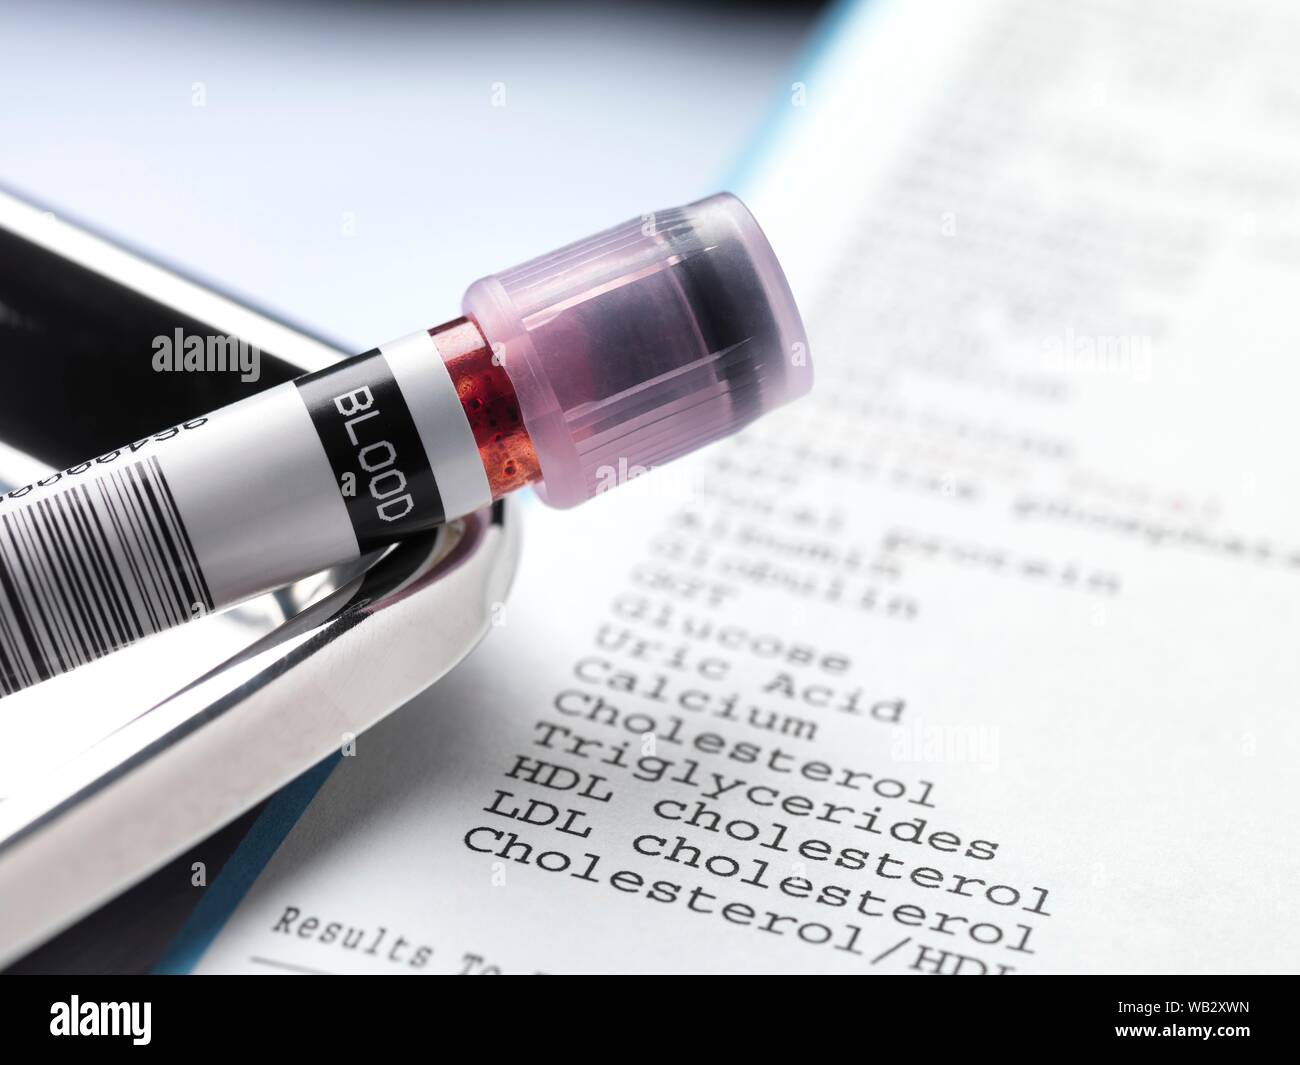 Blood sample and test results. Stock Photo